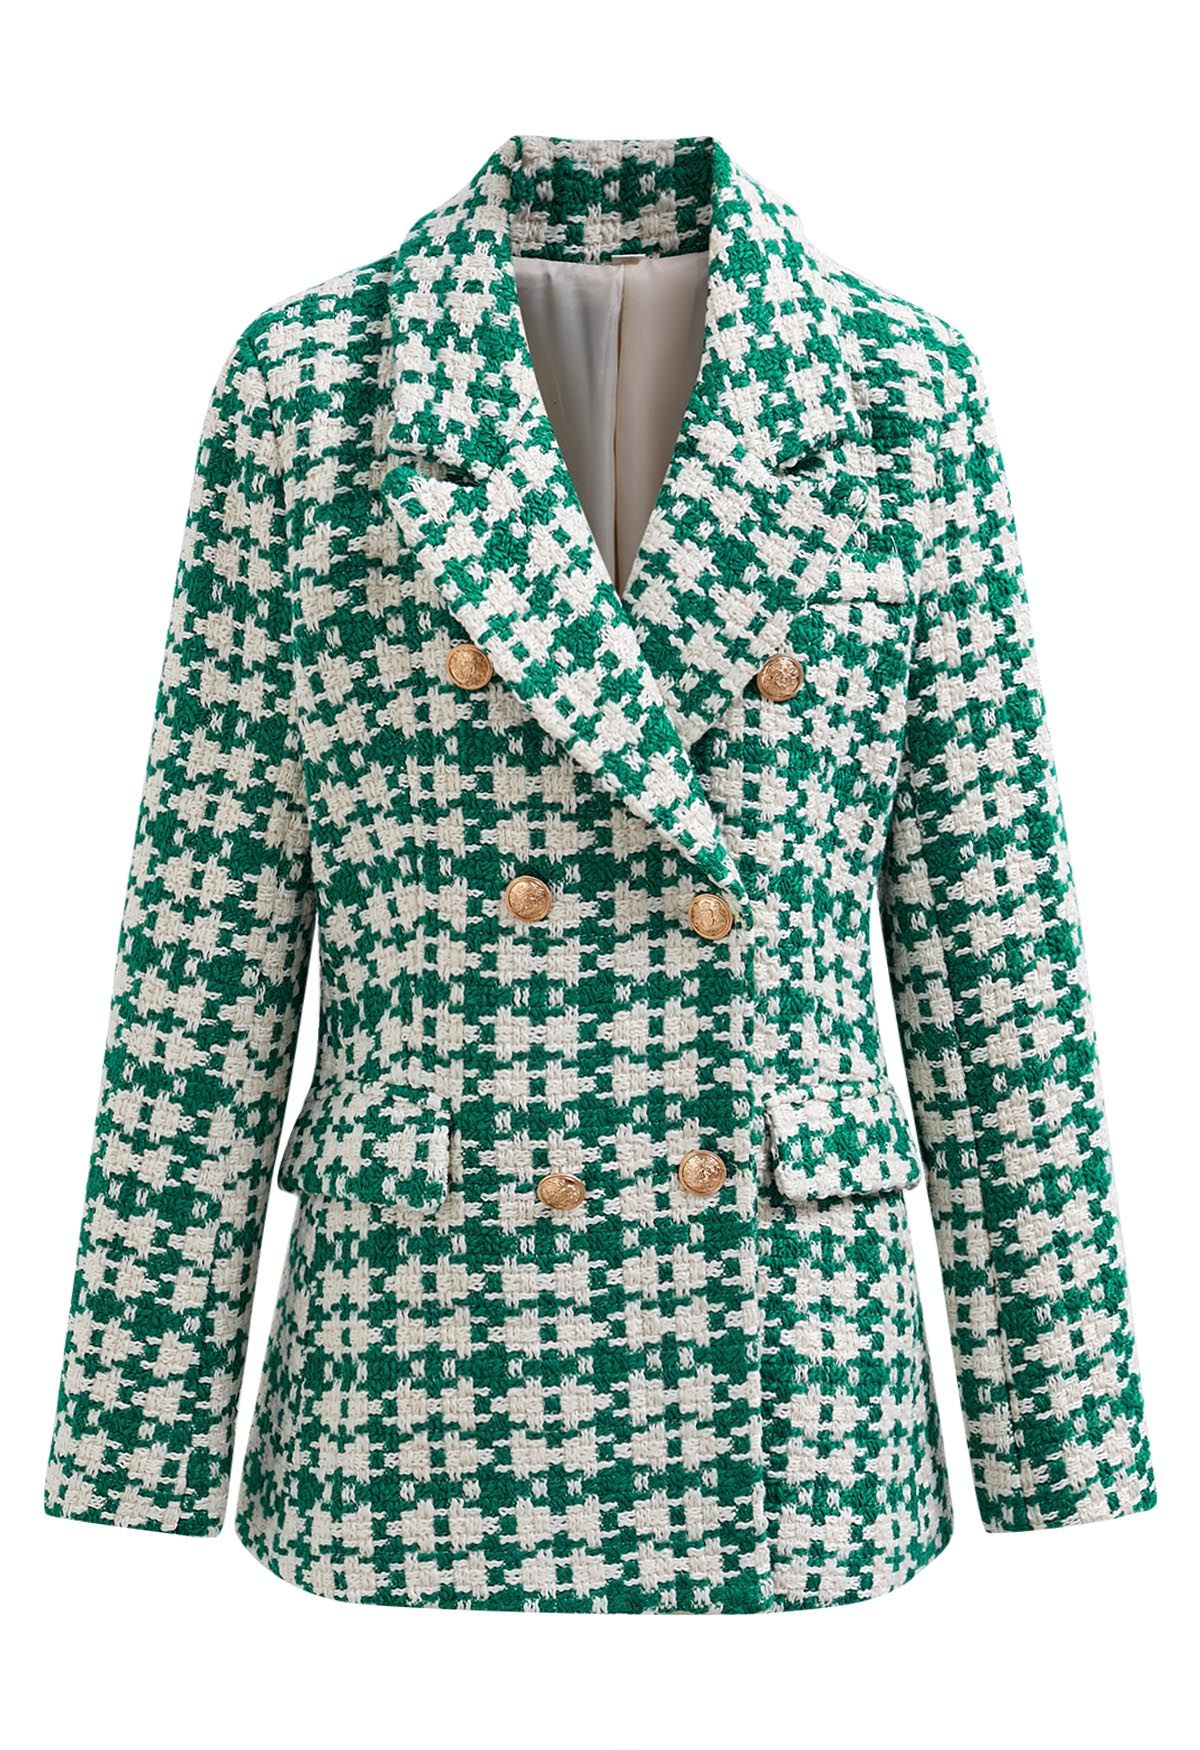 Lush Houndstooth Tweed Double-Breasted Blazer - Retro, Indie and Unique ...